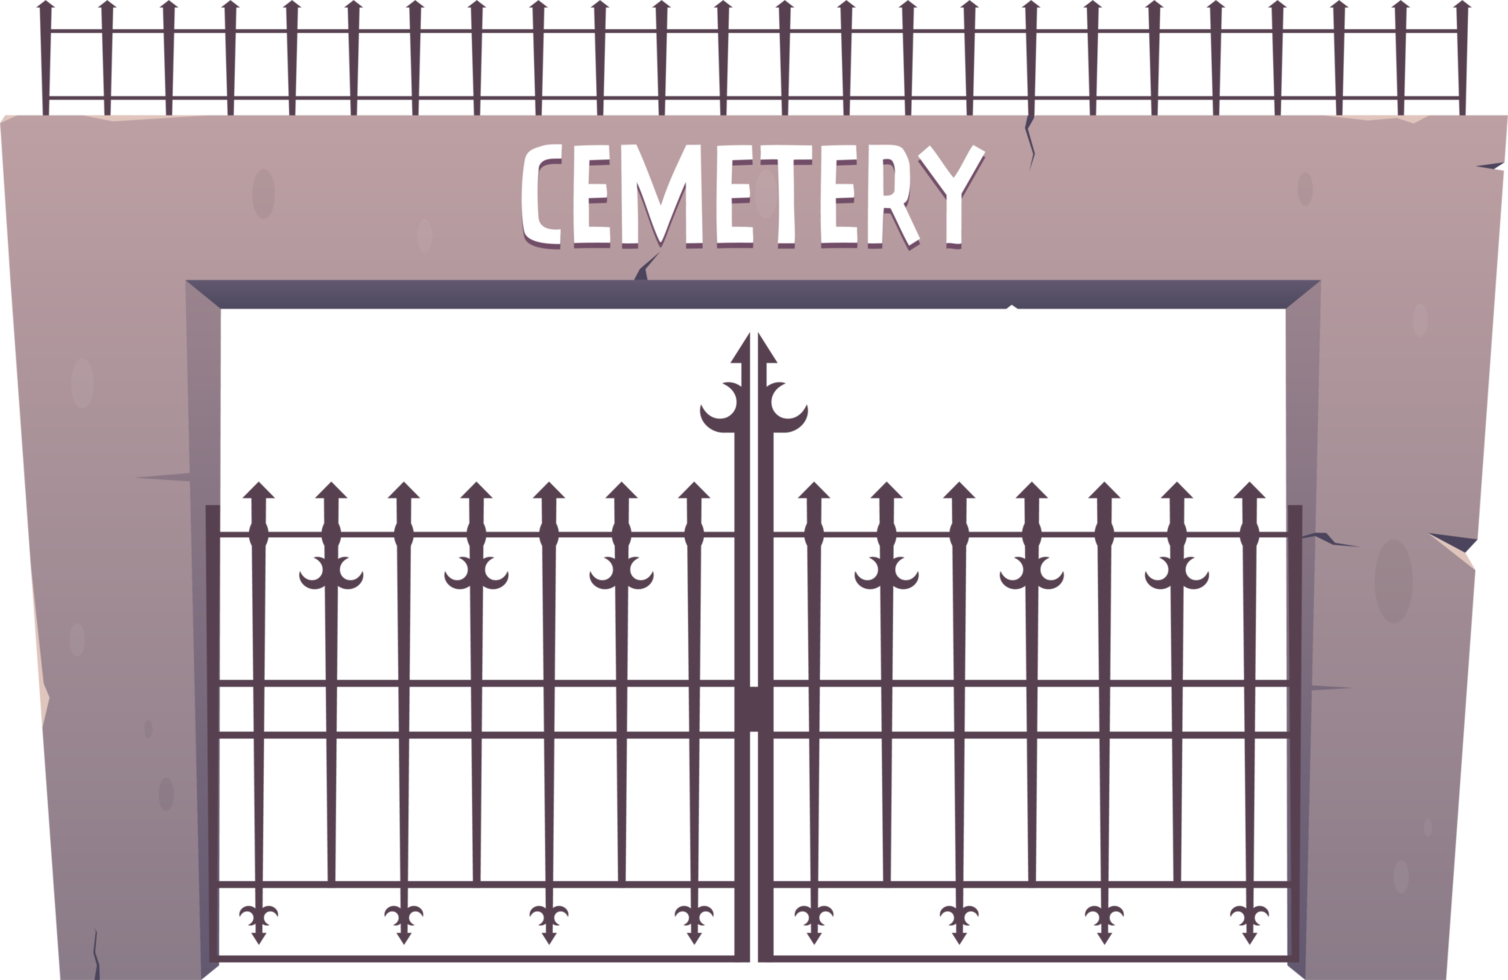 Entrance to the cemetery, steel and stone gates in cartoon style png